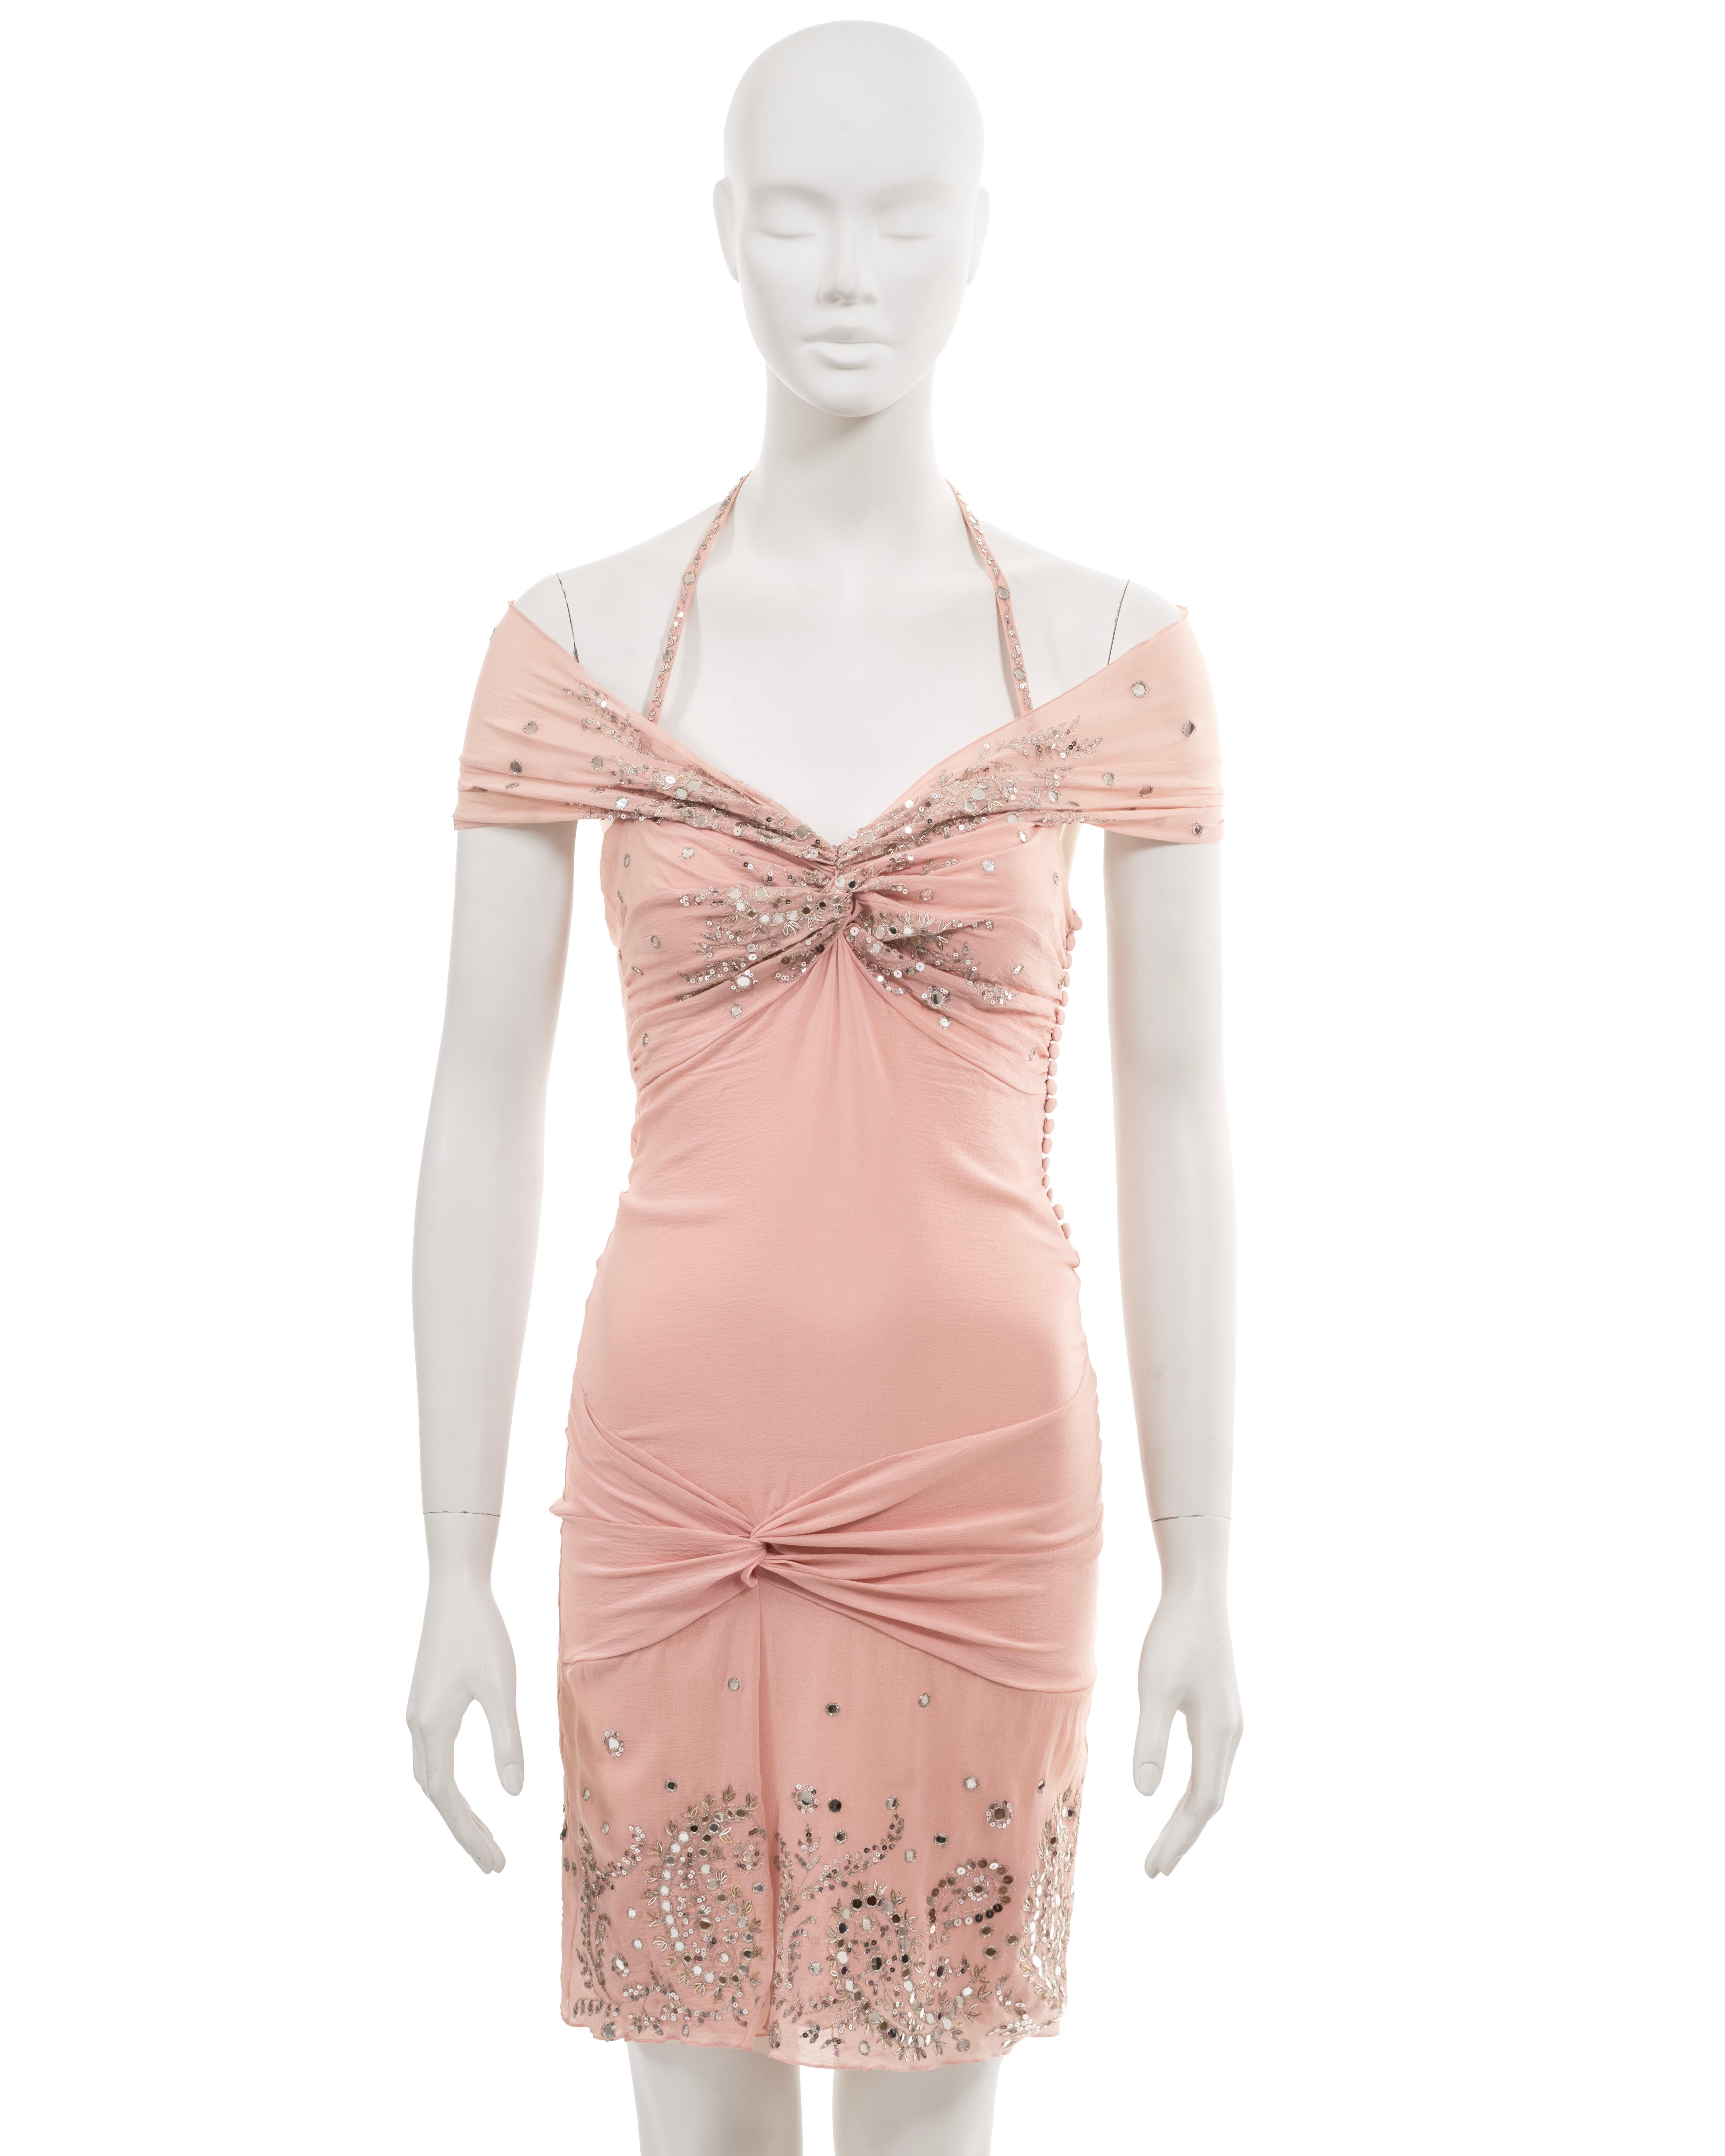 ▪ Christian Dior evening mini dress 
▪ Creative Director: John Galliano
▪ Spring-Summer 2004
▪ Sold by One of a Kind Archive
▪ Double-layered pink silk-lycra
▪ Off-shoulder straps and halterneck ties 
▪ Silver thread embroidery 
▪ Glass mirror